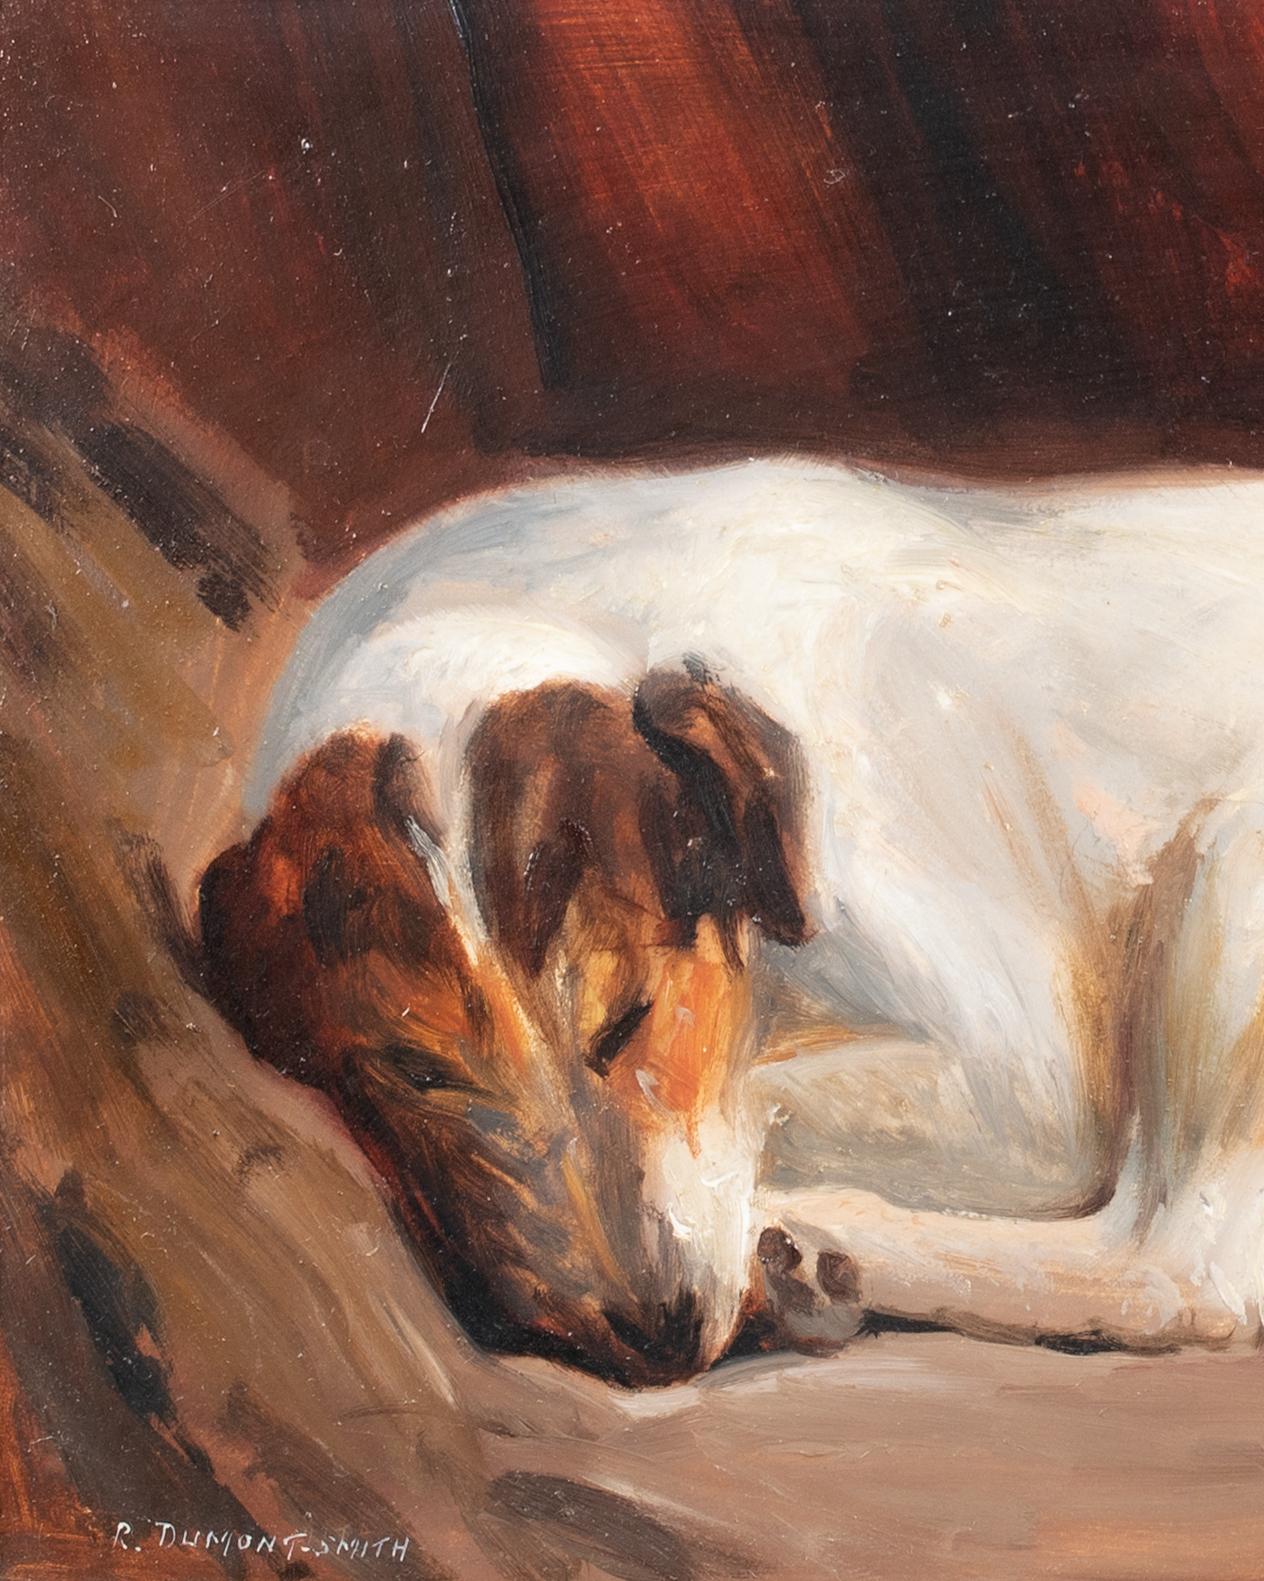 Portrait Of  Sleeping Jack Russell Terrier, circa 1900  by Robert Dumont Smith   3